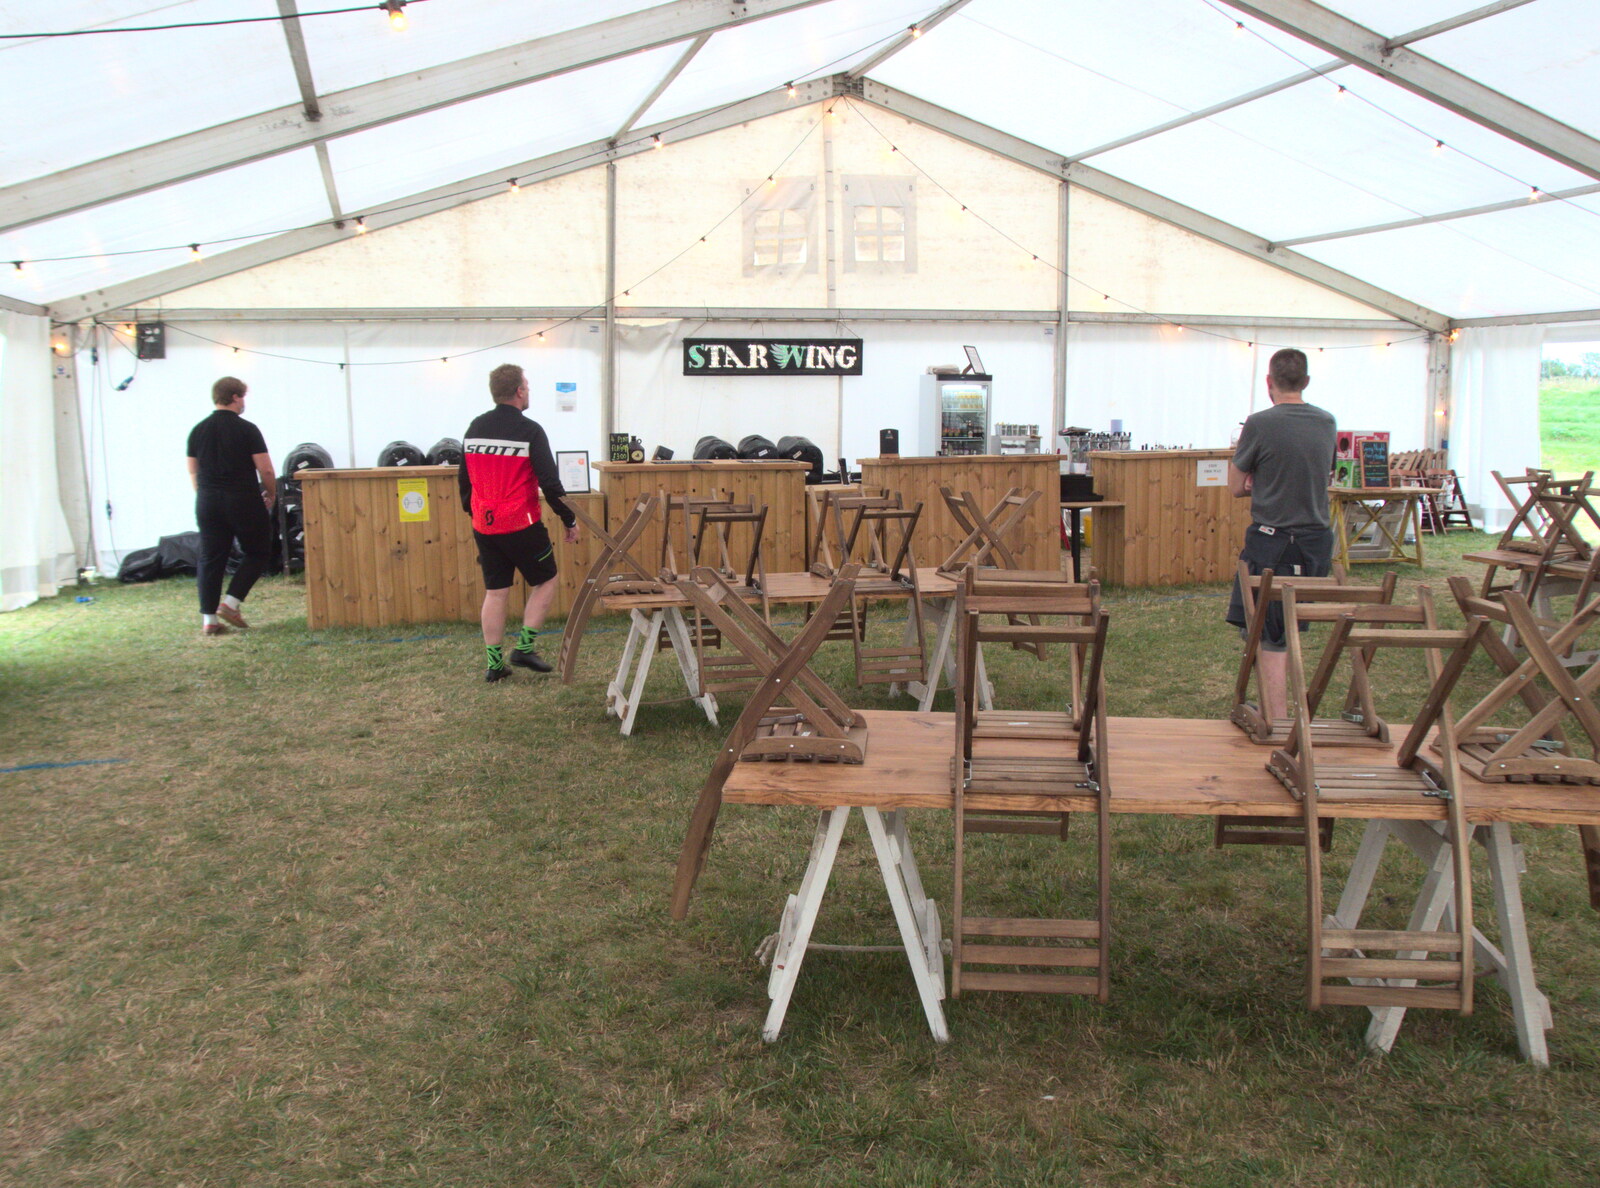 Star Wing's outdoor marquee from The BSCC at Redgrave and Station 119, Eye, Suffolk - 17th July 2020